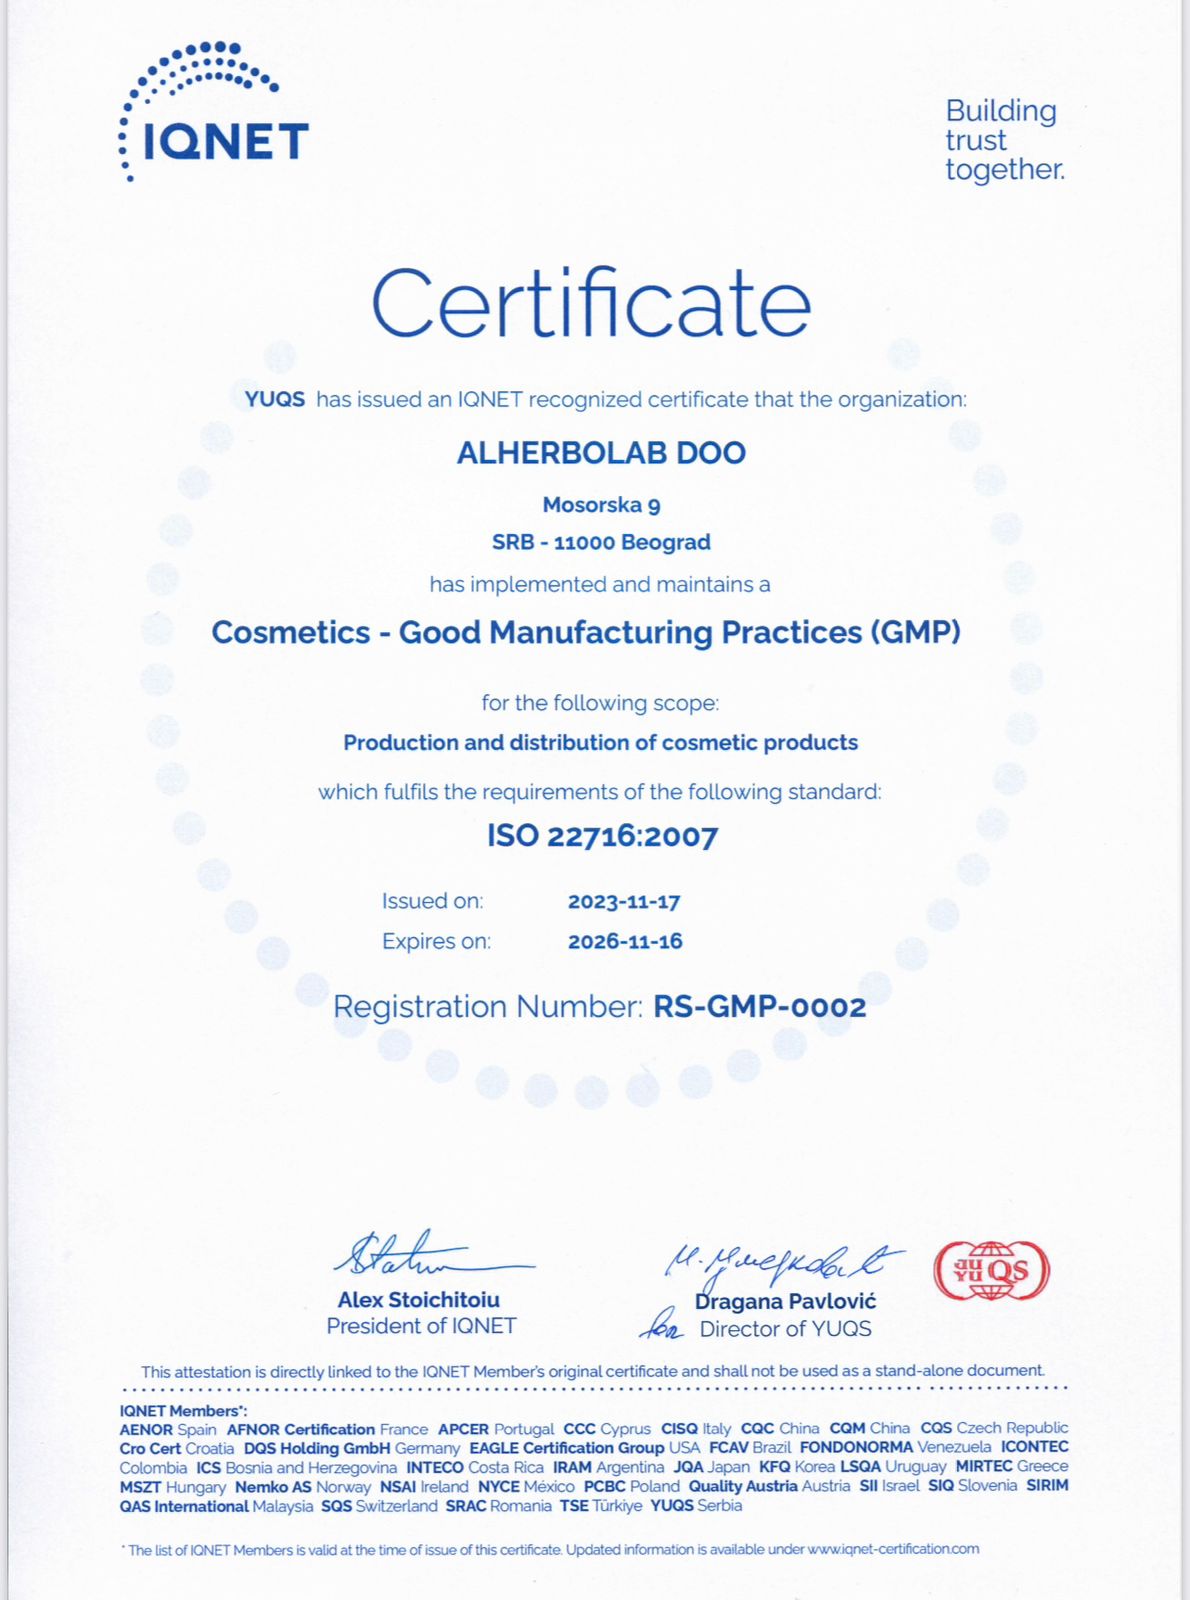 GMP is our new step towards compliance with quality principles